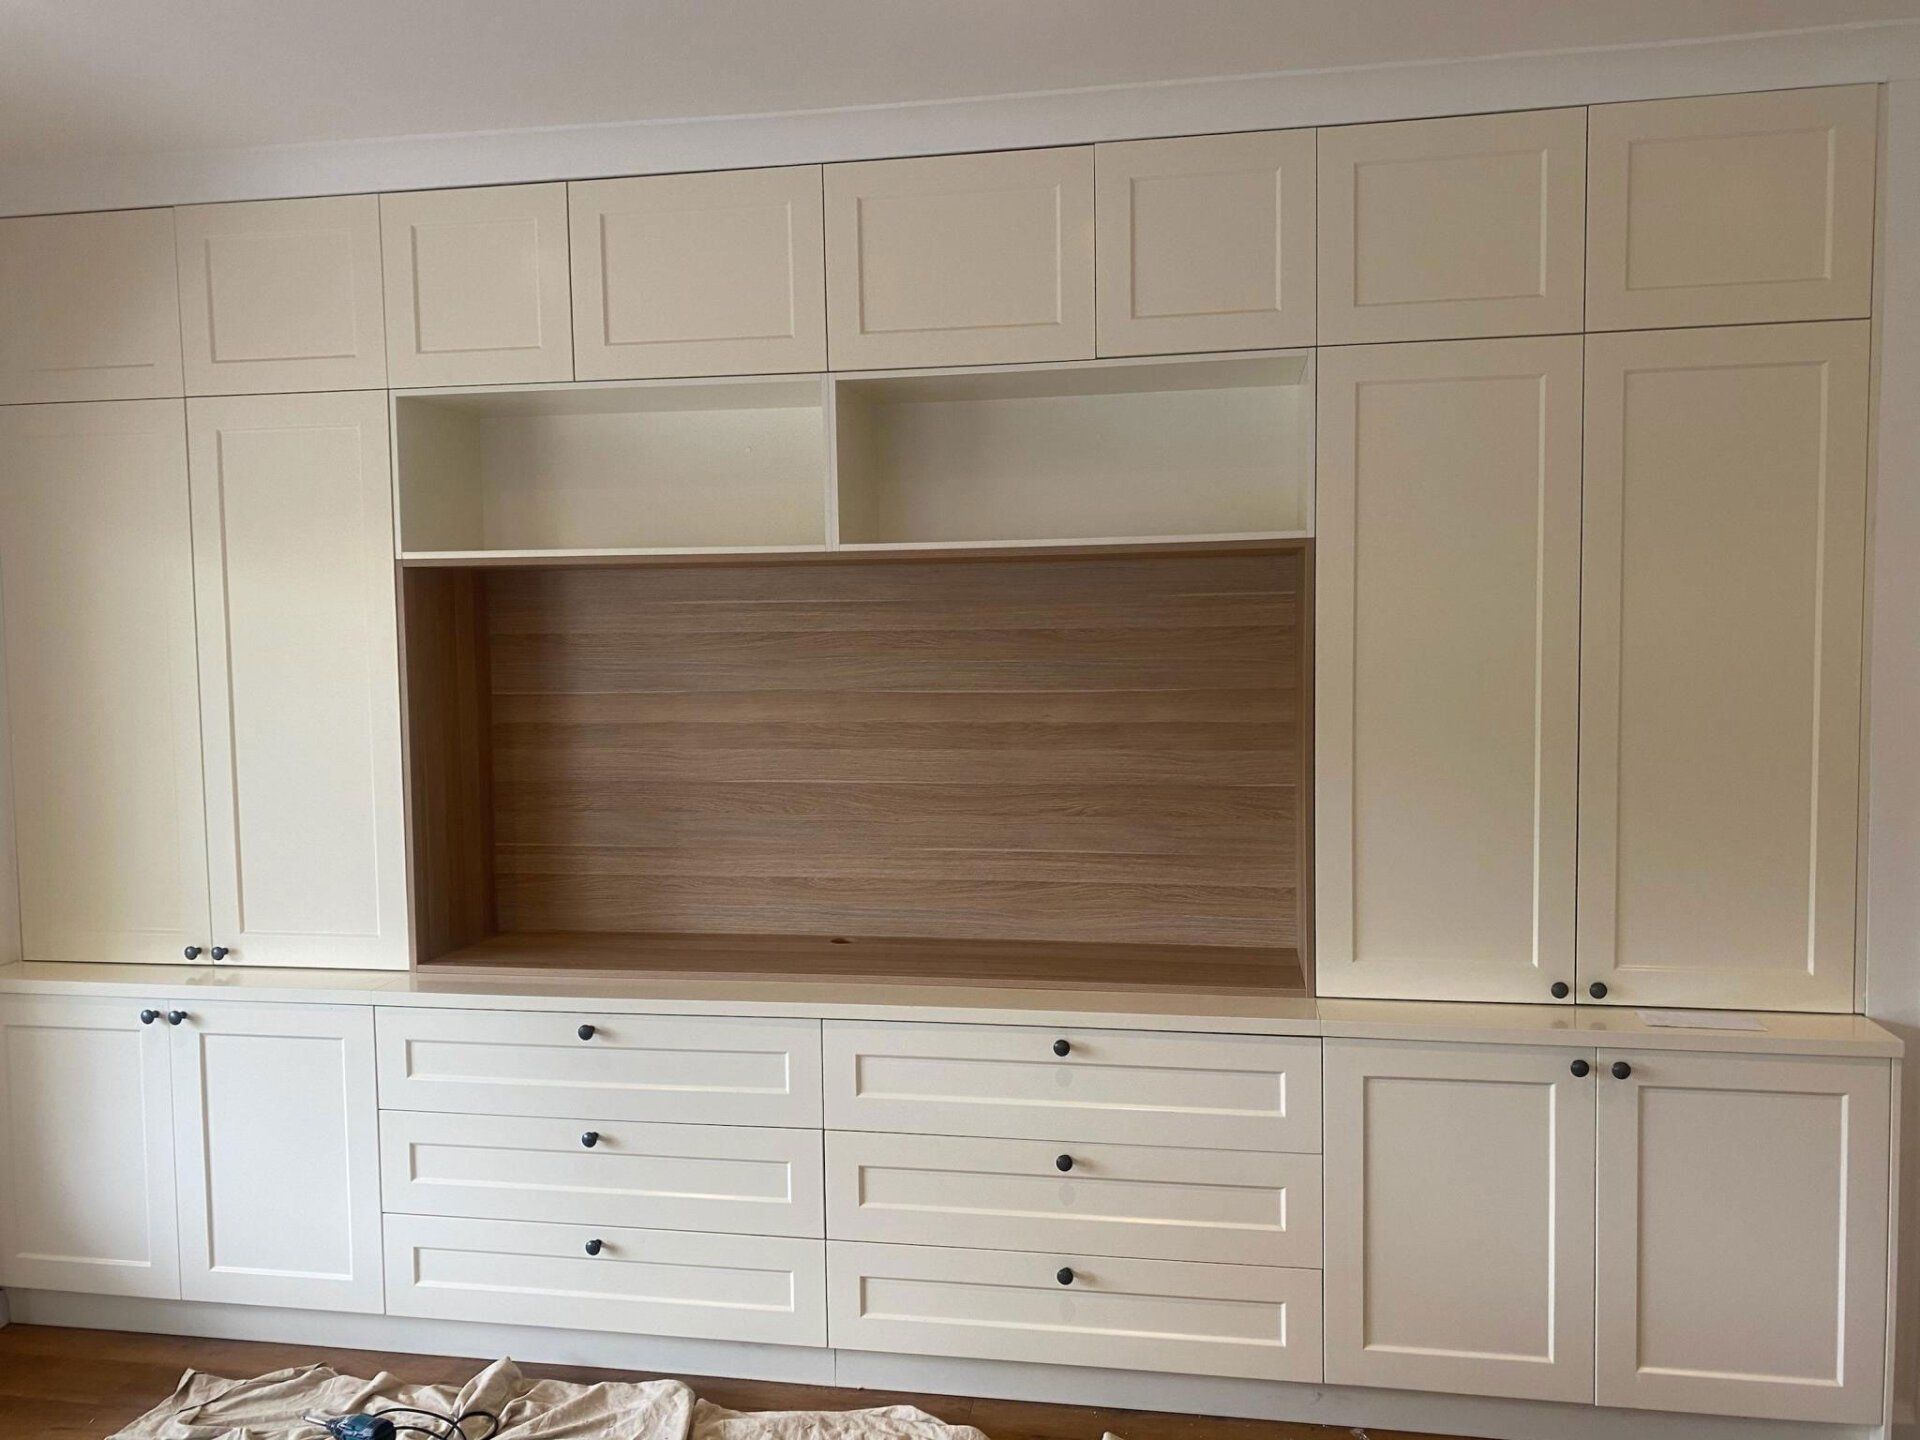 Built in wall units we've made in Sydney